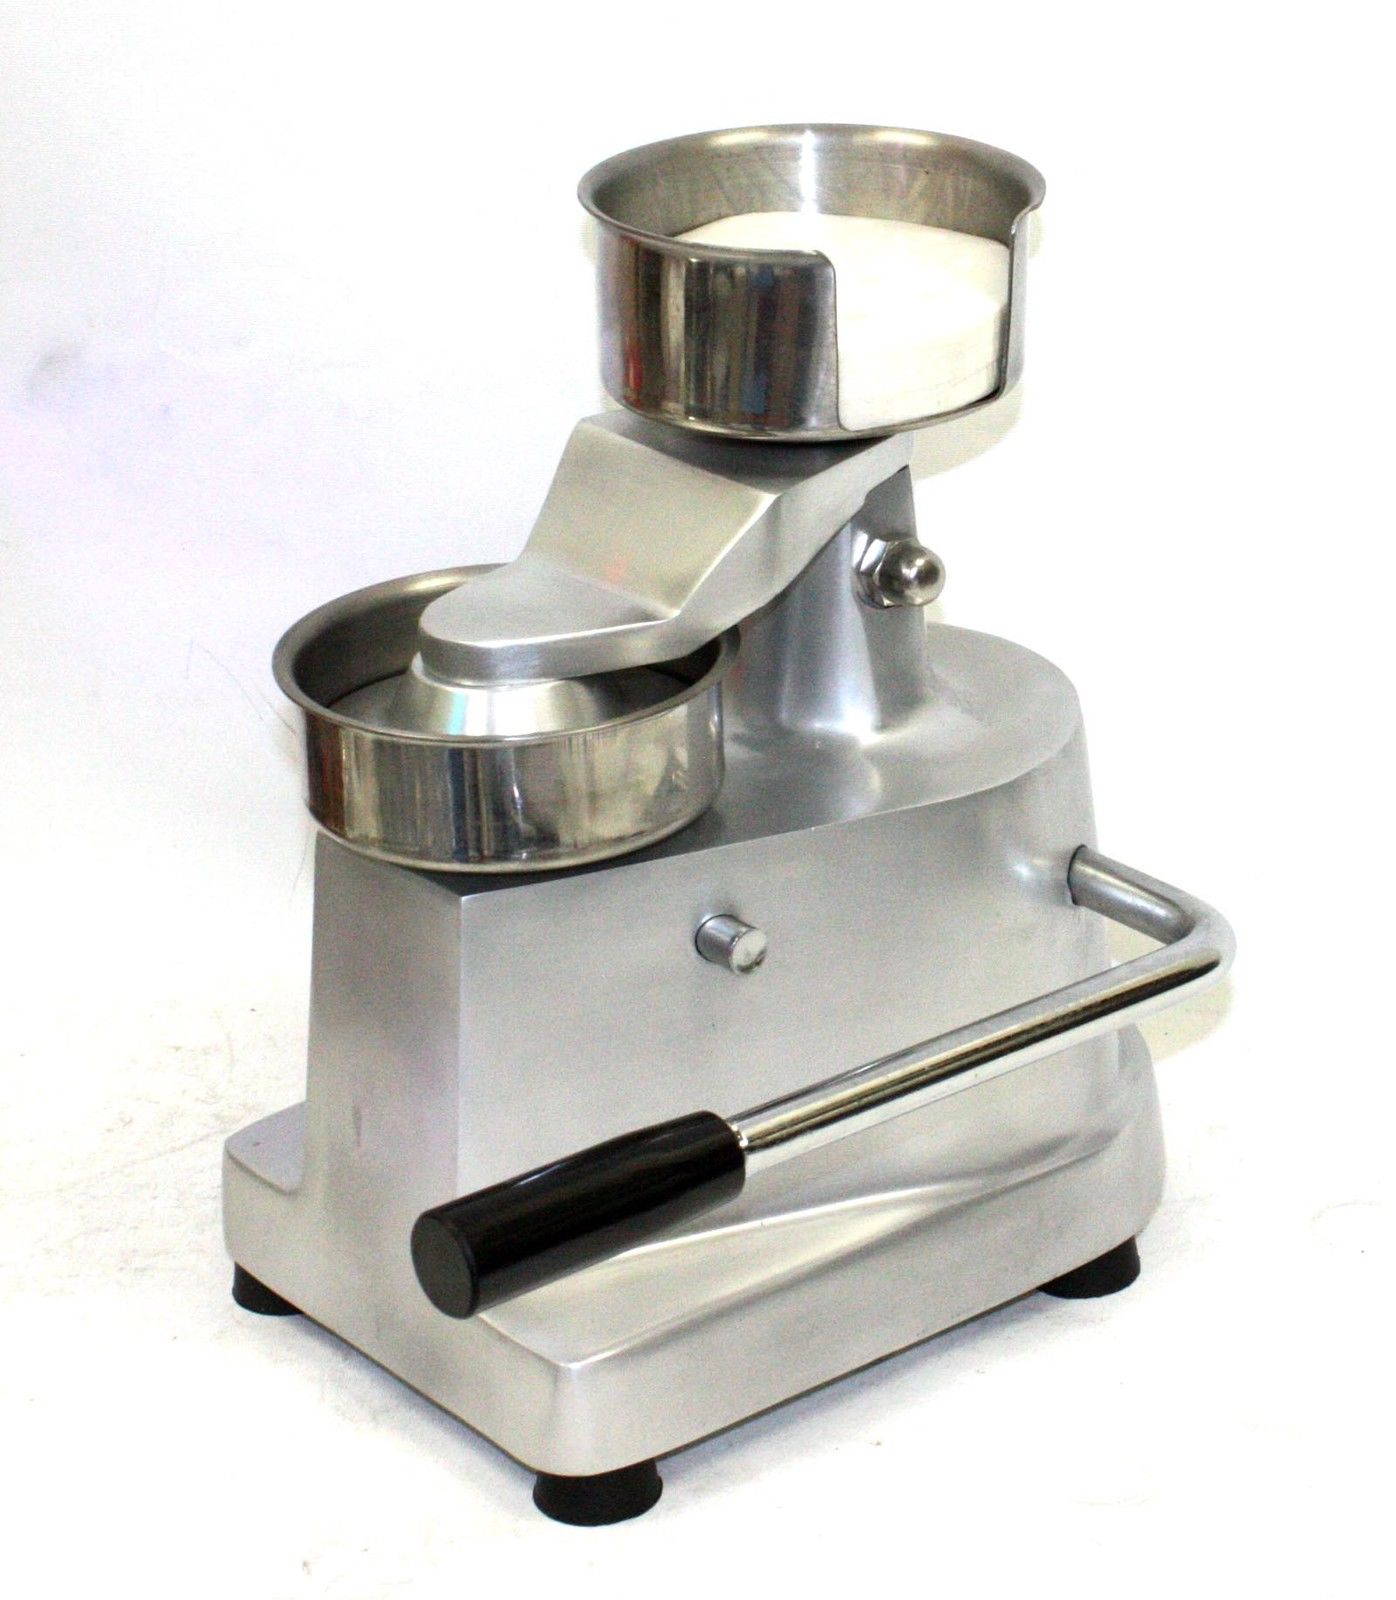 Stainless Manual Hamburger Press Patty Molding Machine for Deli Home kitchen 